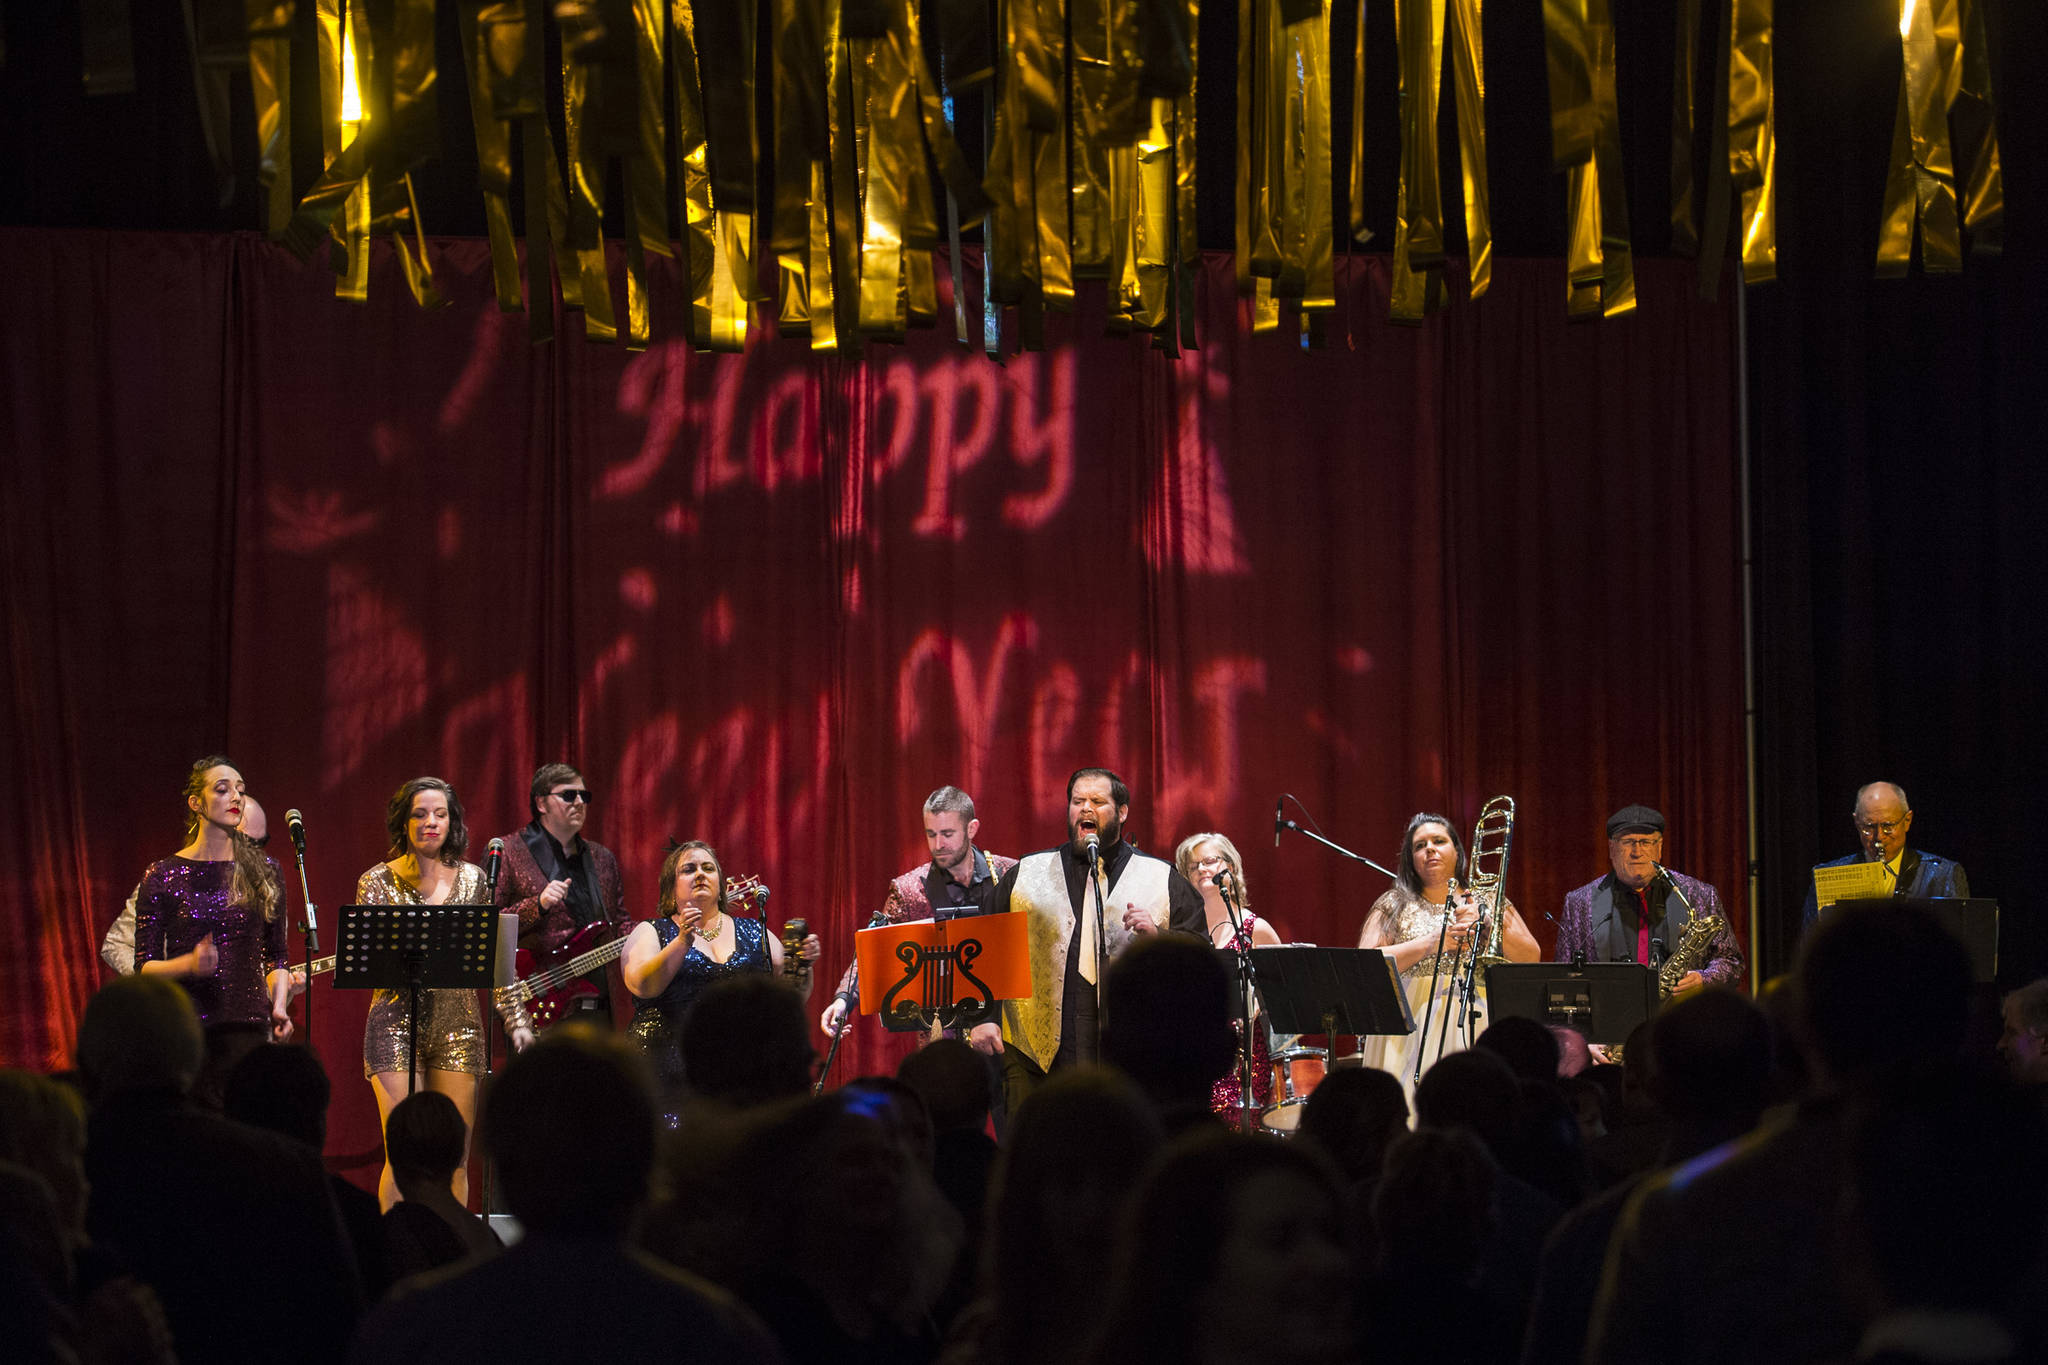 Juneau residents dance to Gamble & High Costa Livin’ during the New Year’s Eve Gala at Centennial Hall on Monday, Dec. 31, 2018. The event was a fundraiser for the Juneau Arts and Humanities Council and Juneau Jazz & Classics. (Michael Penn | Juneau Empire)